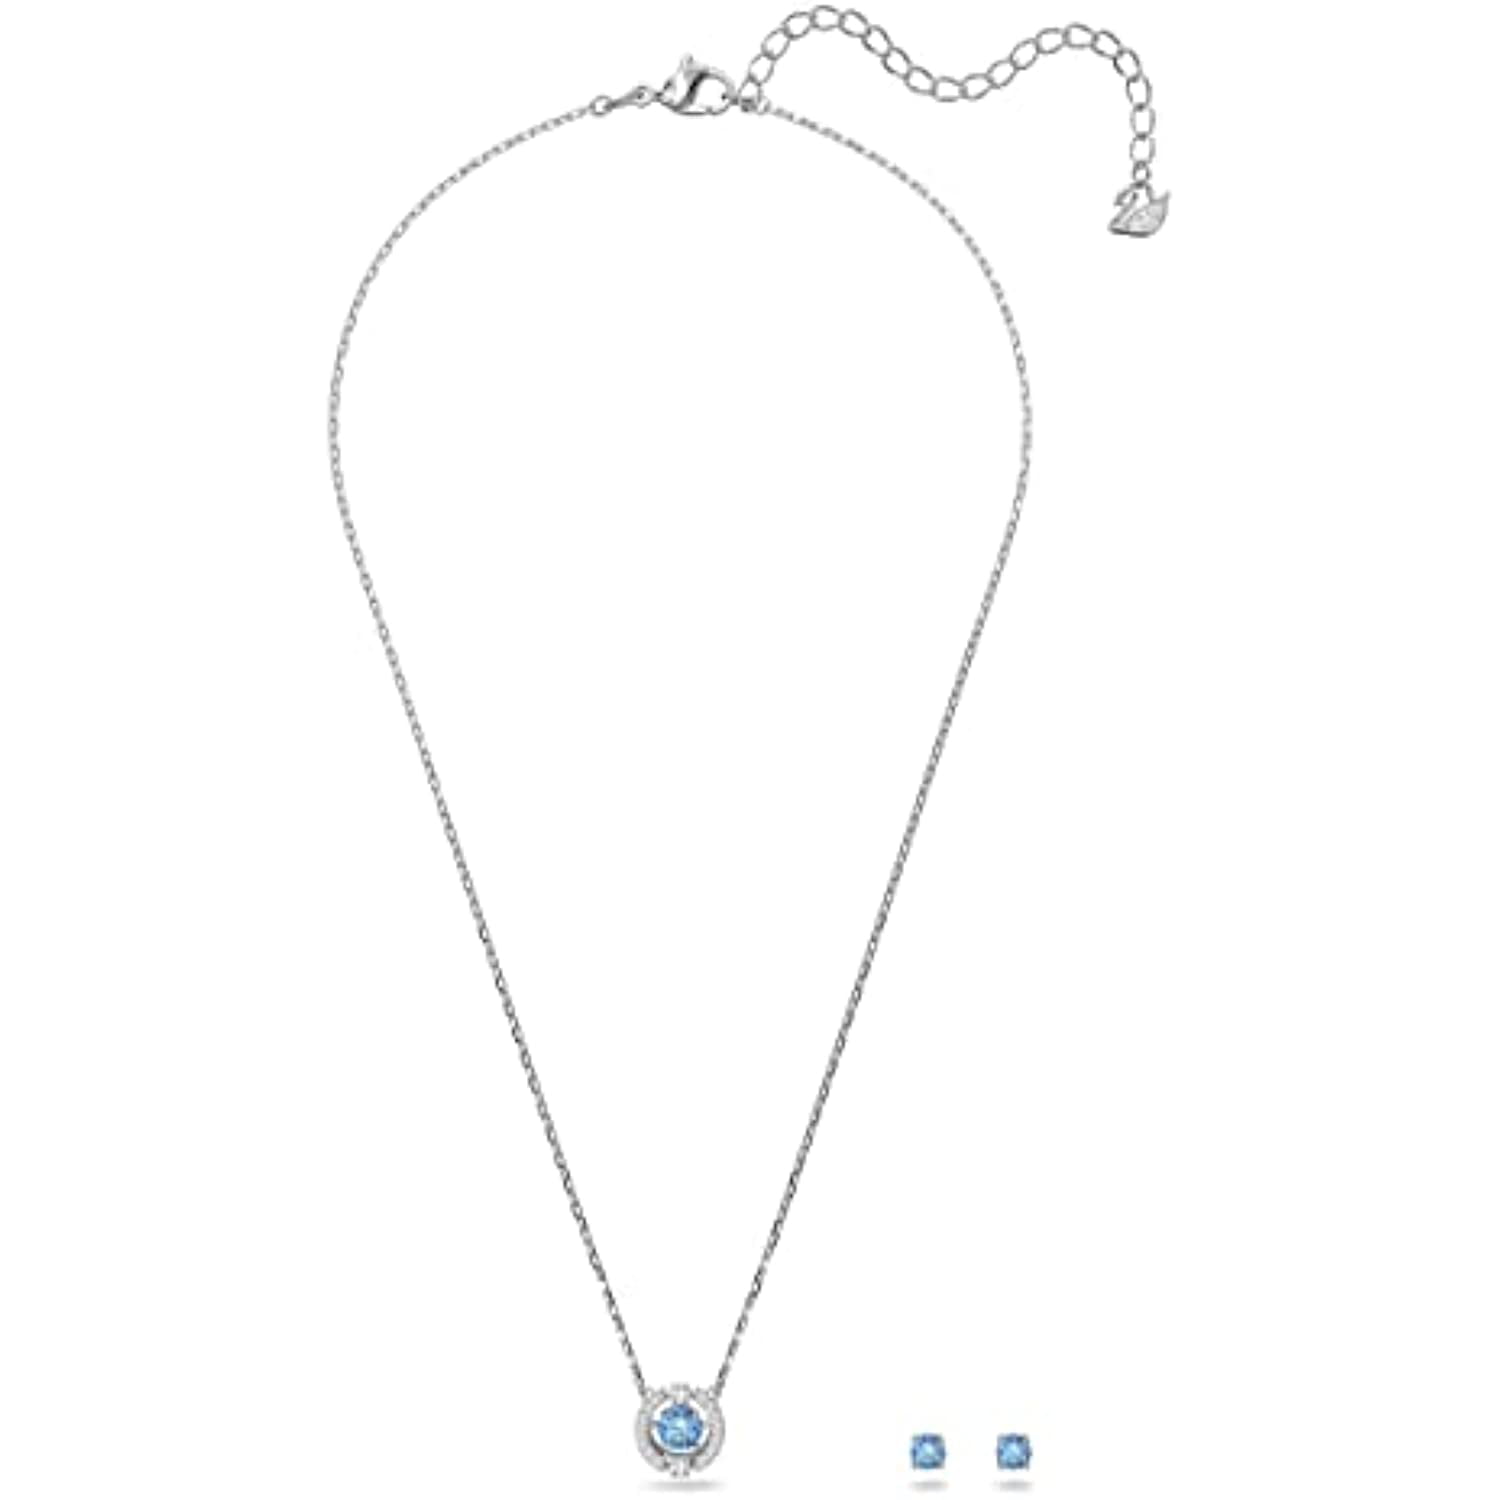 March-Aquamarine Rivoli Swarovski Crystal Earrings and Necklace Set |  Lively Accents